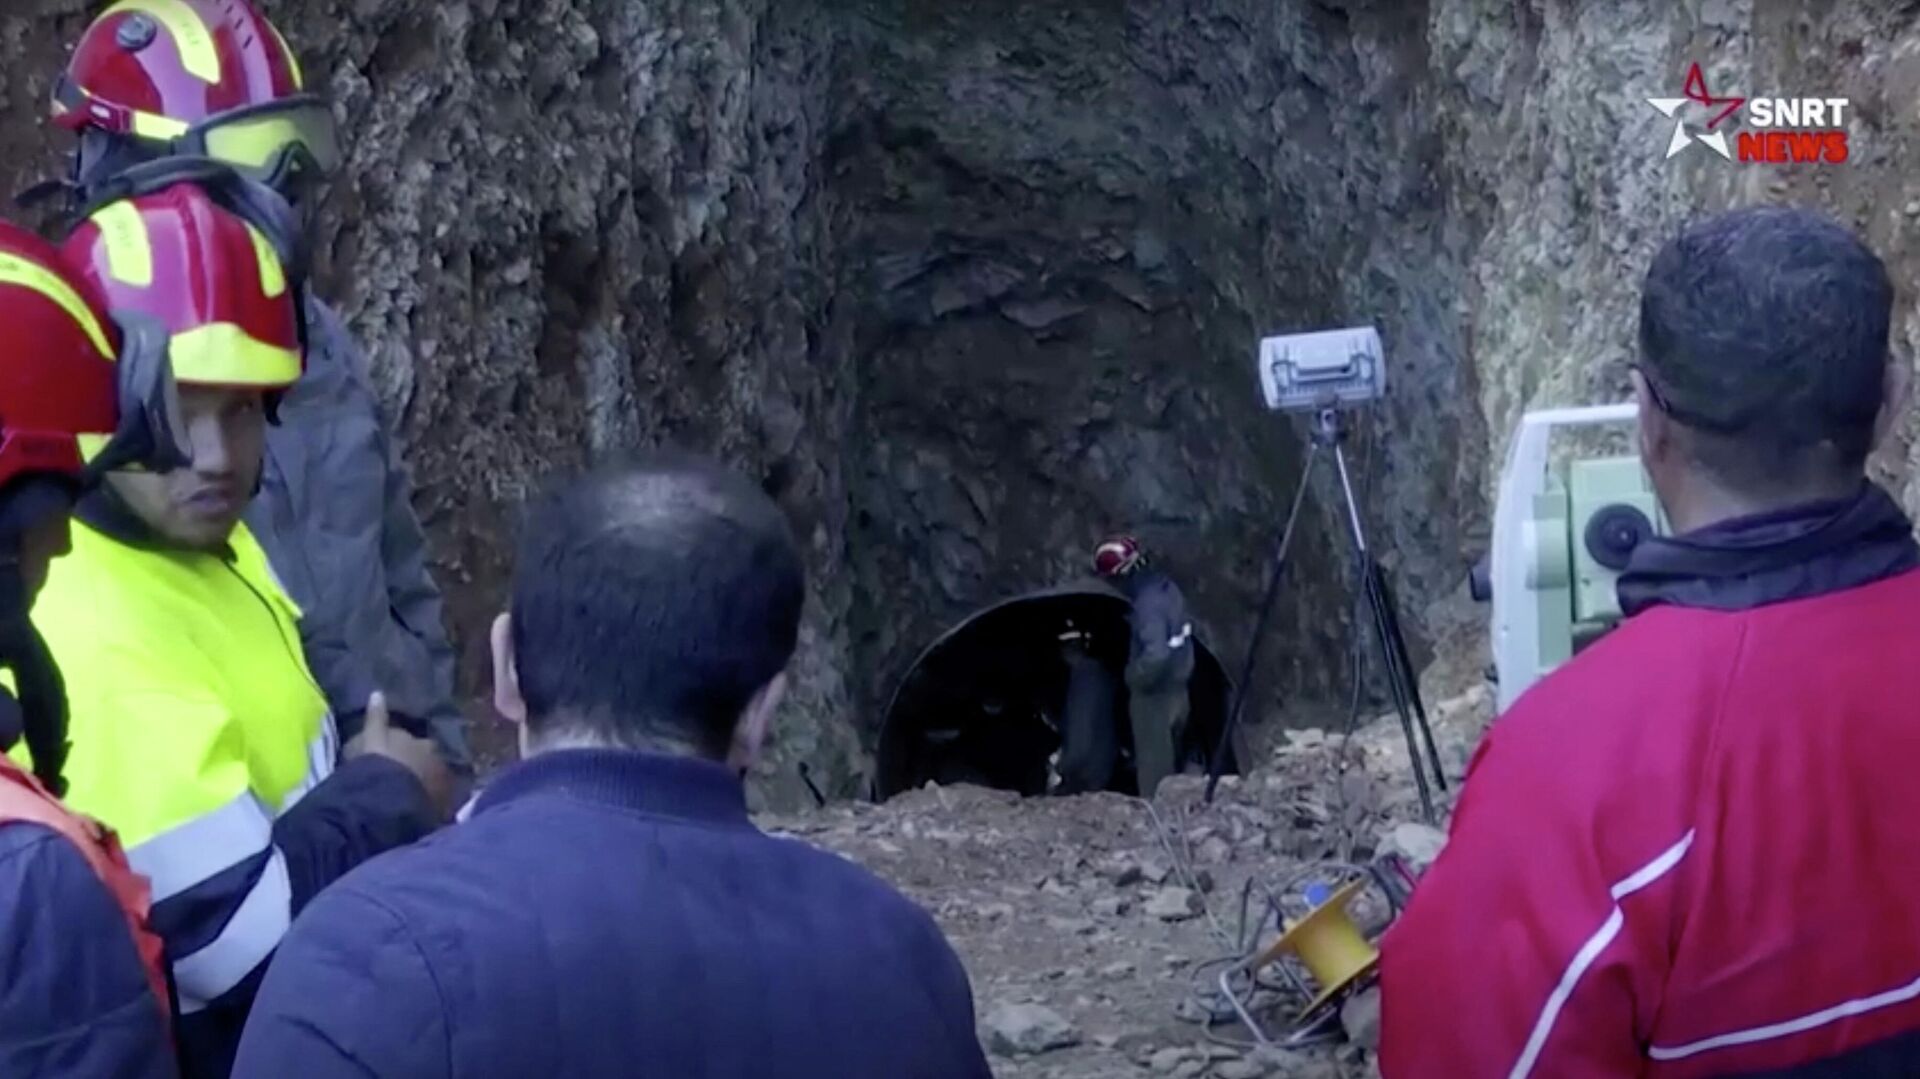 A view shows the site where rescuers are working to reach a five-year-old boy trapped in a well in the northern hill town of Chefchaouen, Morocco, in this still image taken from a video and obtained by Reuters on February 5, 2022. - Sputnik International, 1920, 05.02.2022